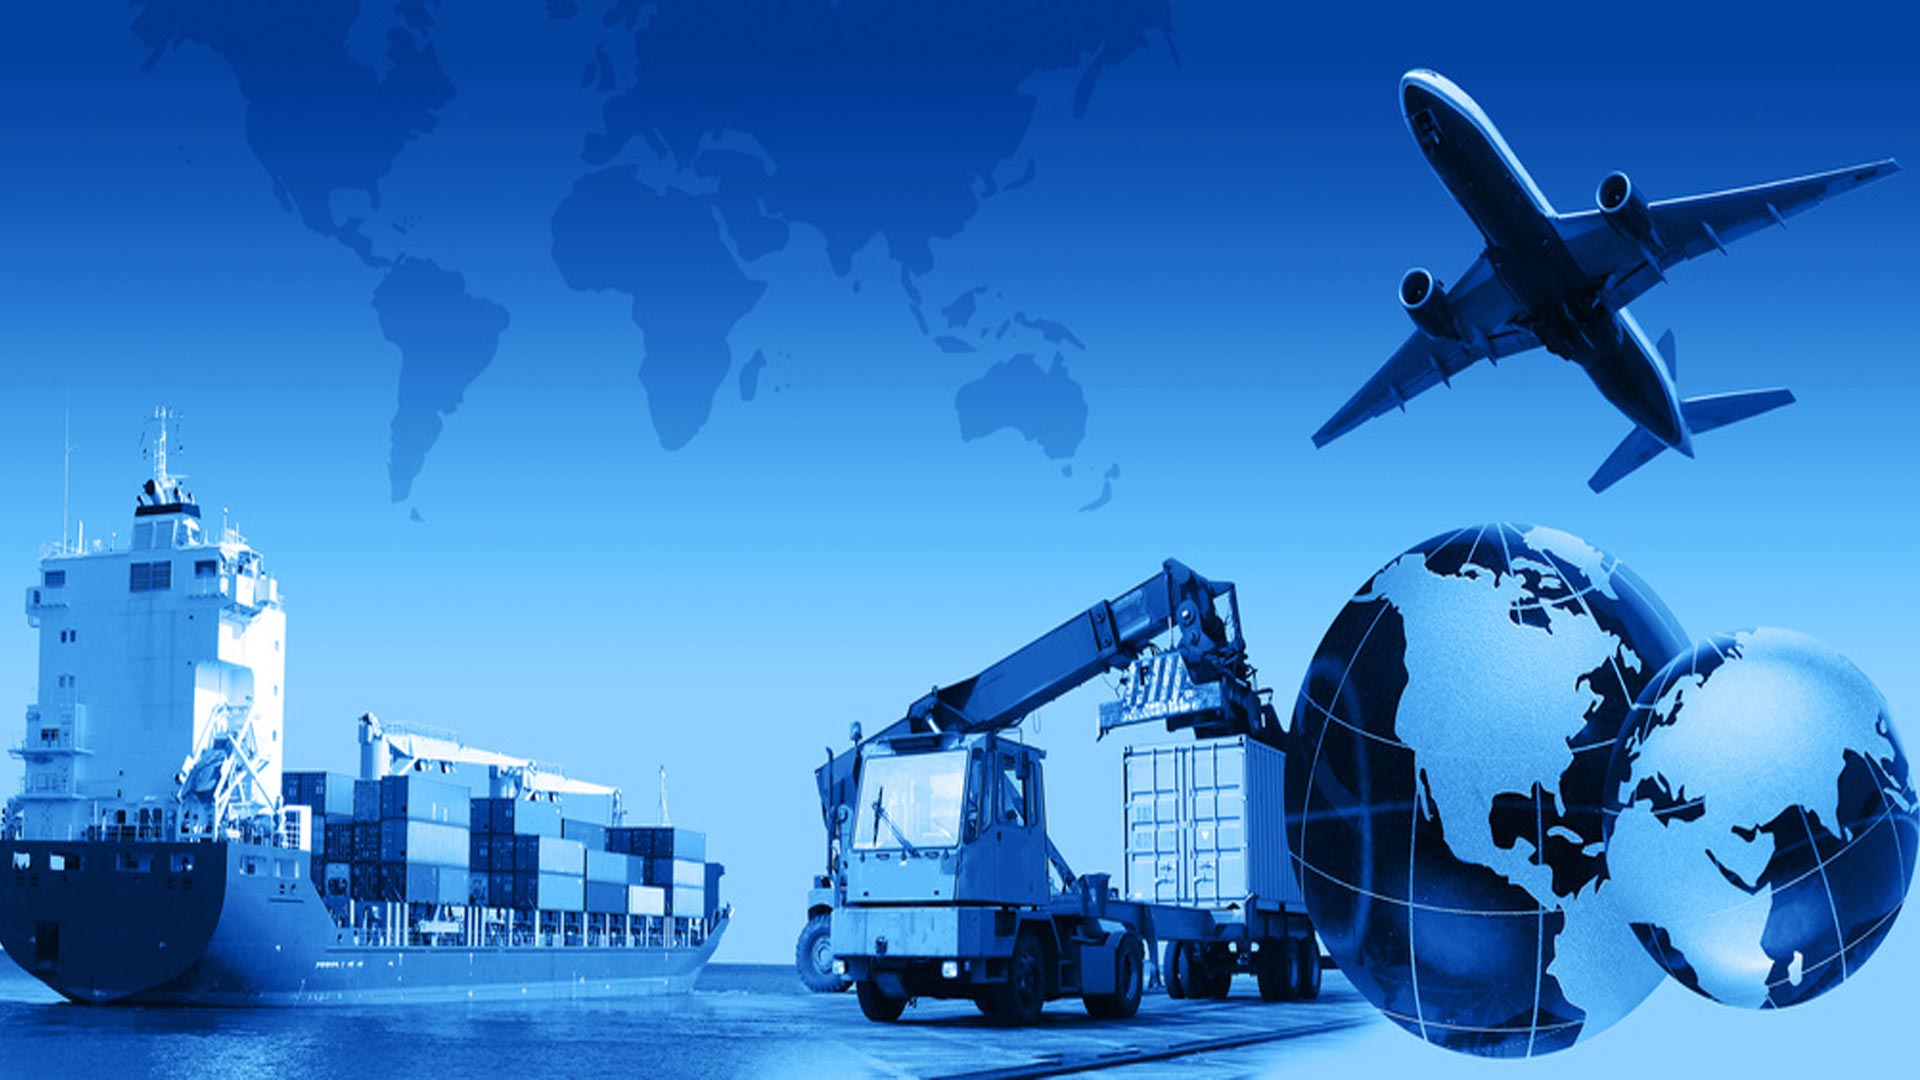 Import Export Business